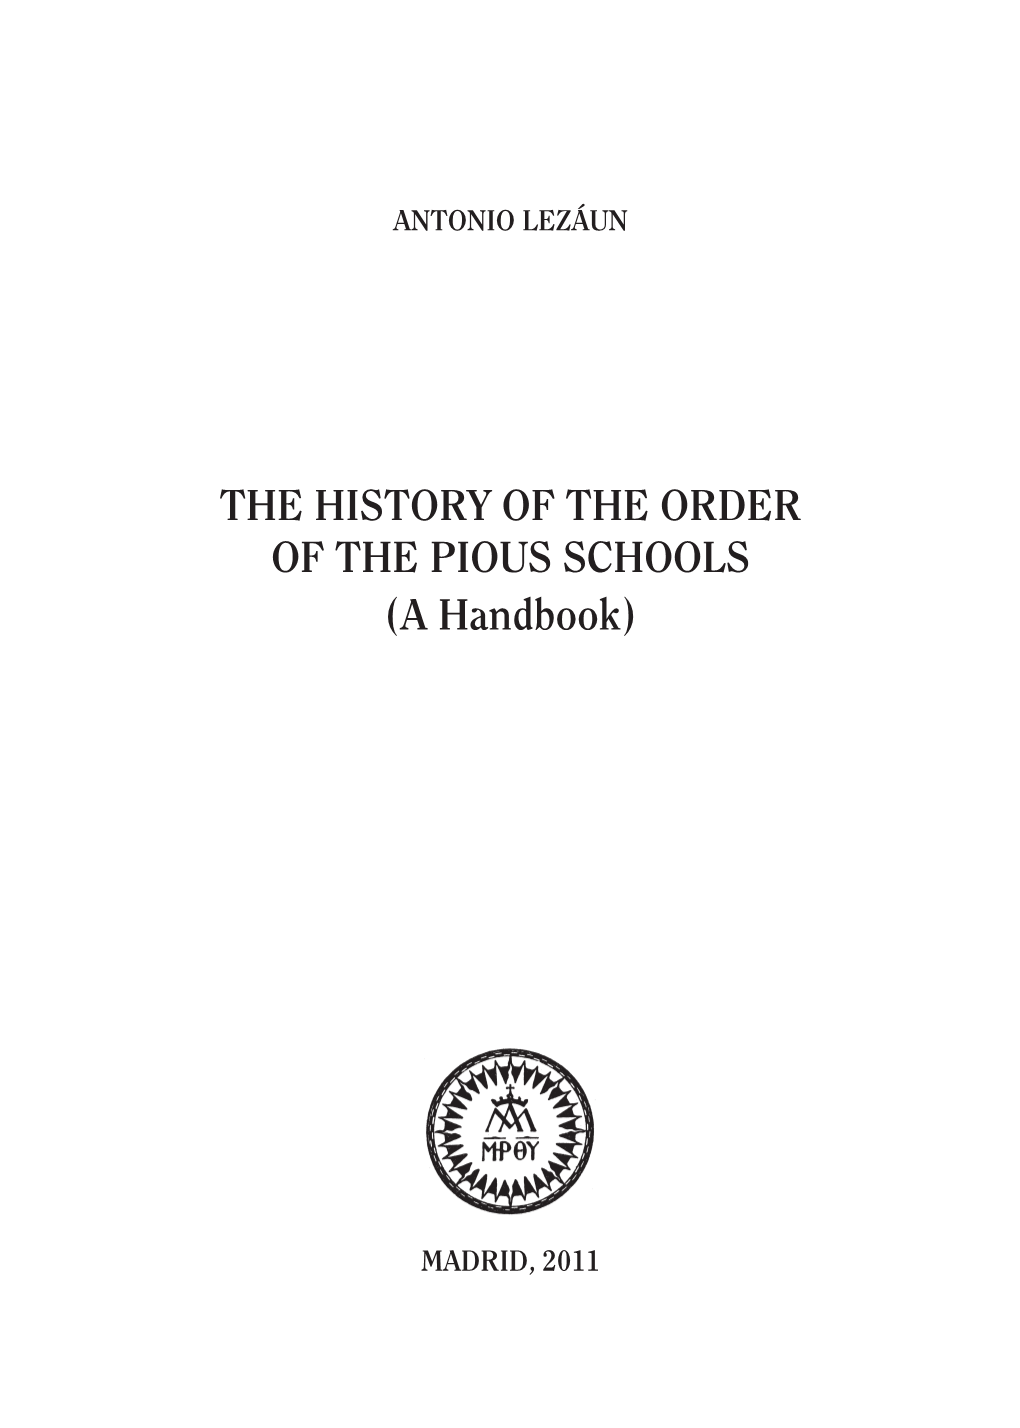 THE HISTORY of the ORDER of the PIOUS SCHOOLS (A Handbook)